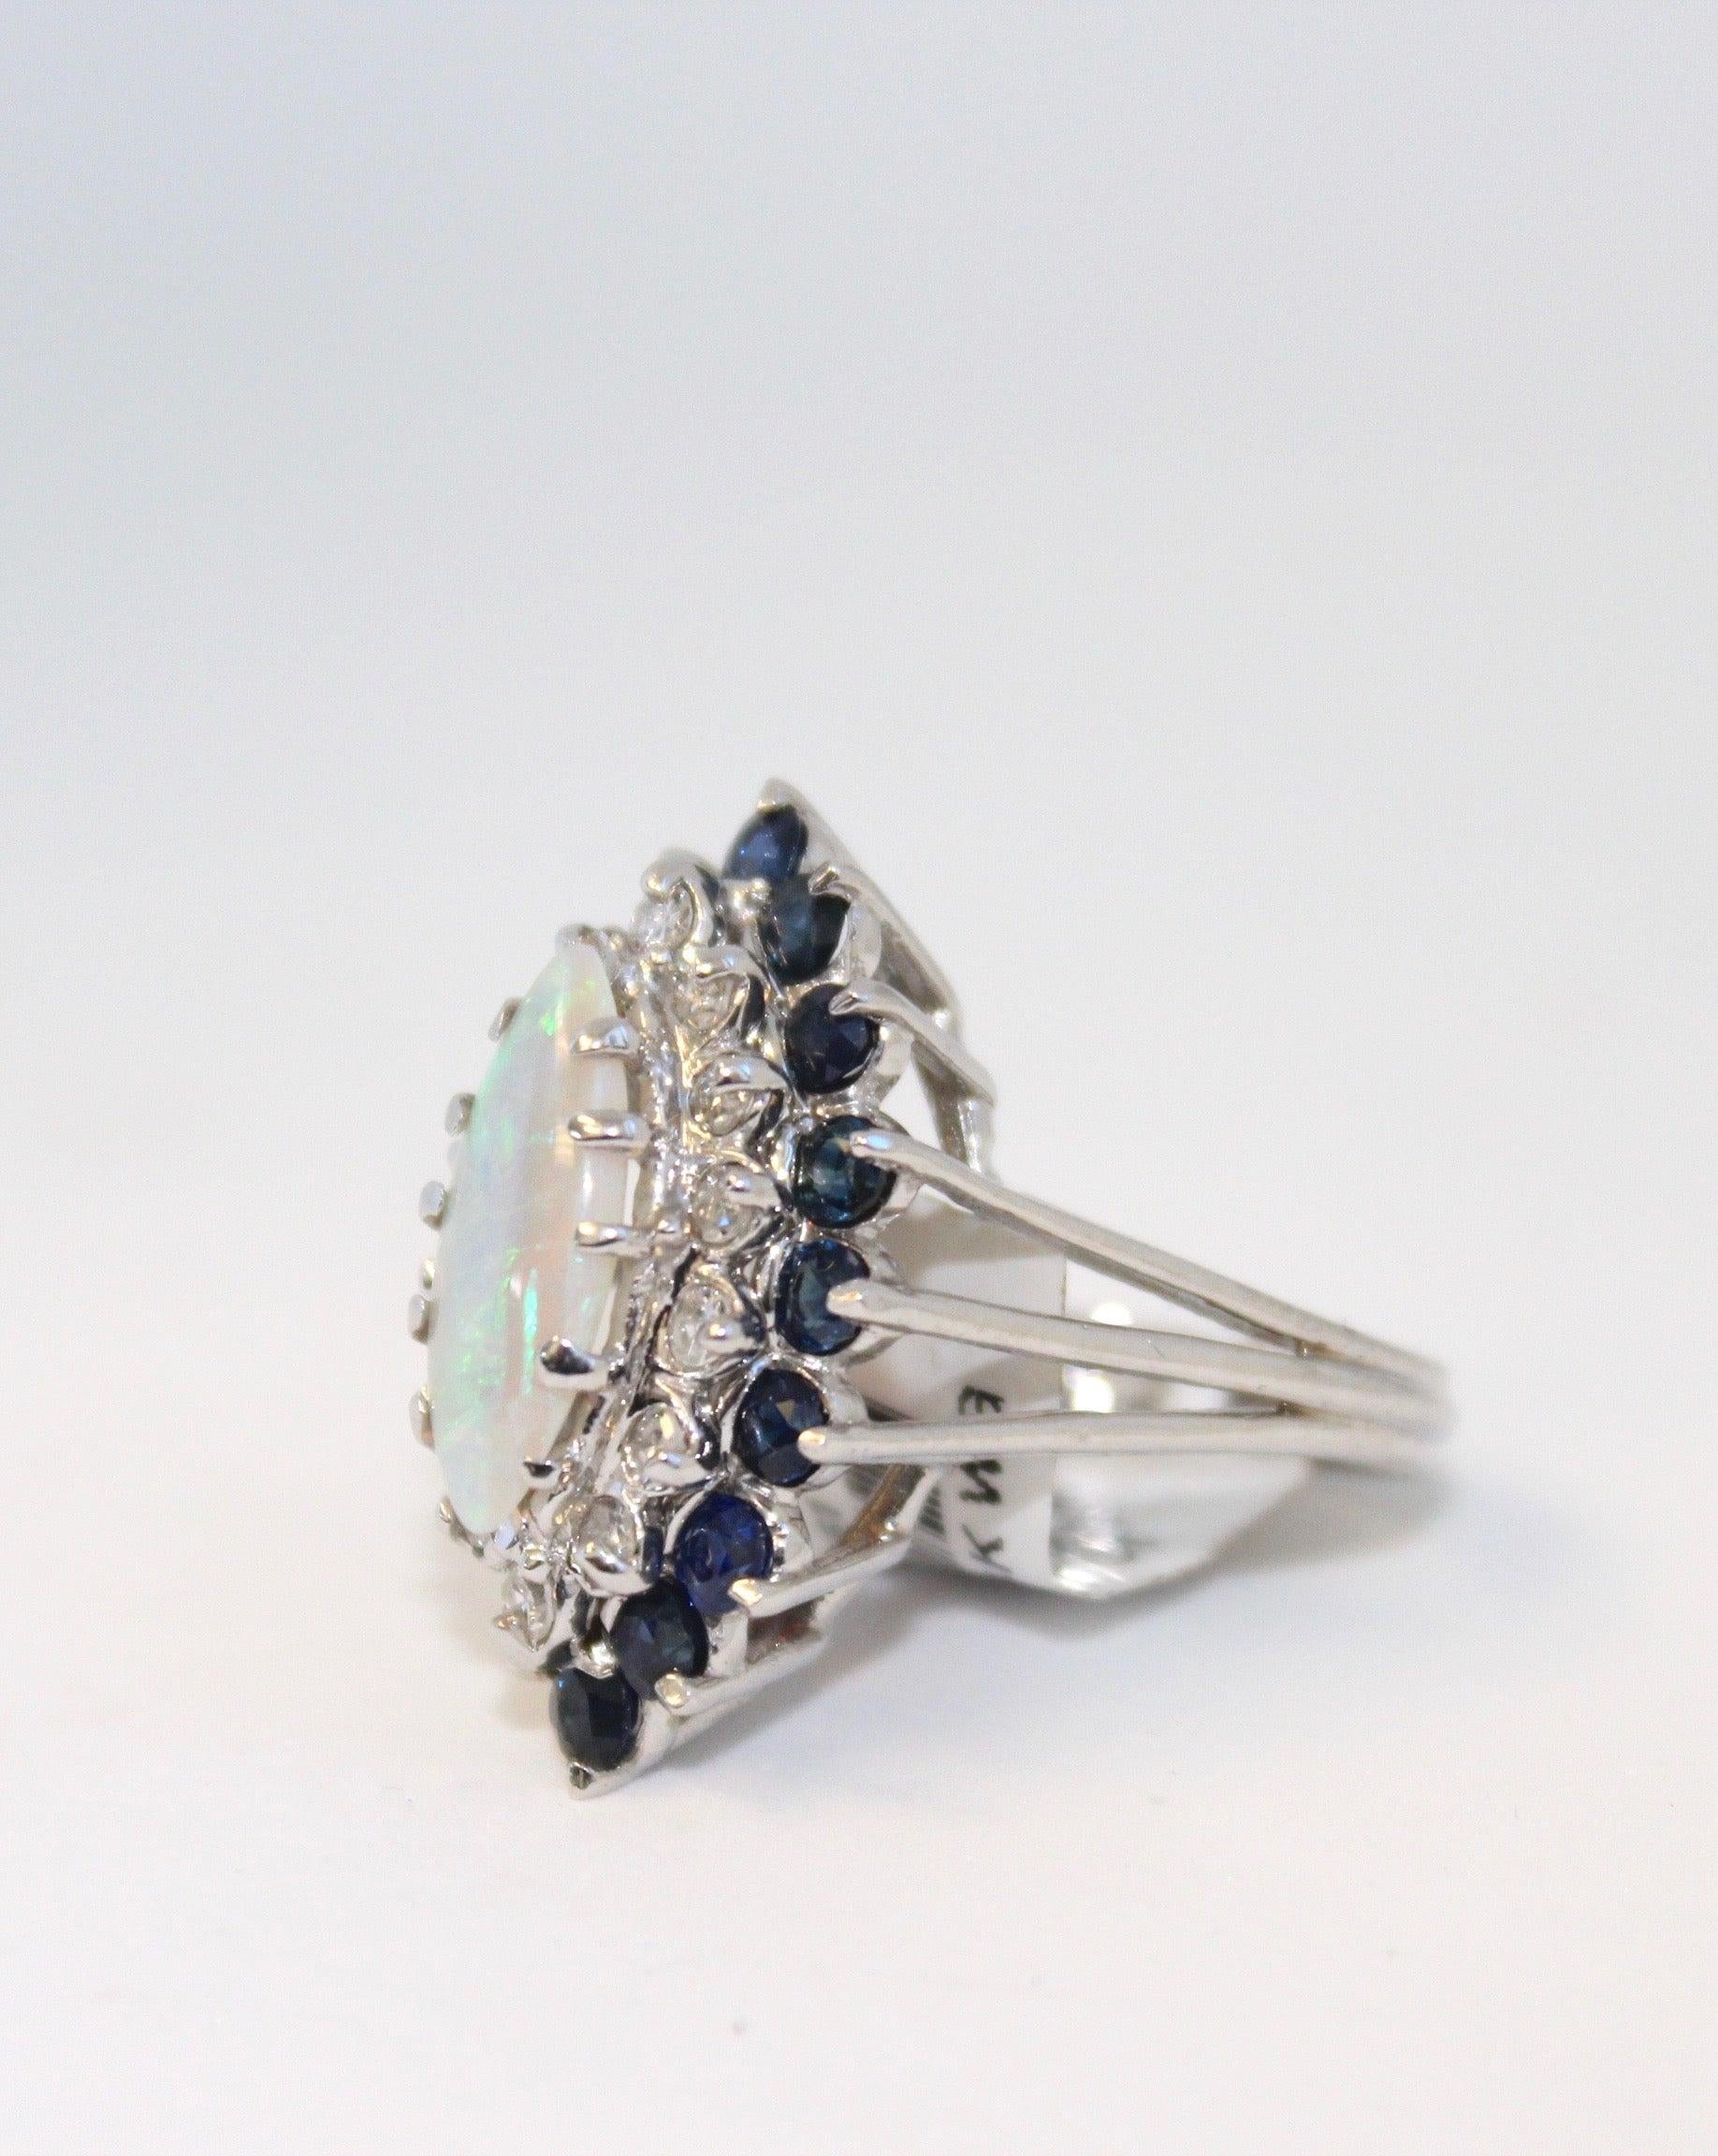 This stunning ring is set in 14K White Gold with One (1) color-filled opal (dimensions 15 x 8 mm). It contains fourteen (14) Round Single Cut Diamonds Weighing 0.21ctw and Sixteen (16) Round Blue Sapphires weighing 1.60ctw. 

It is currently sized